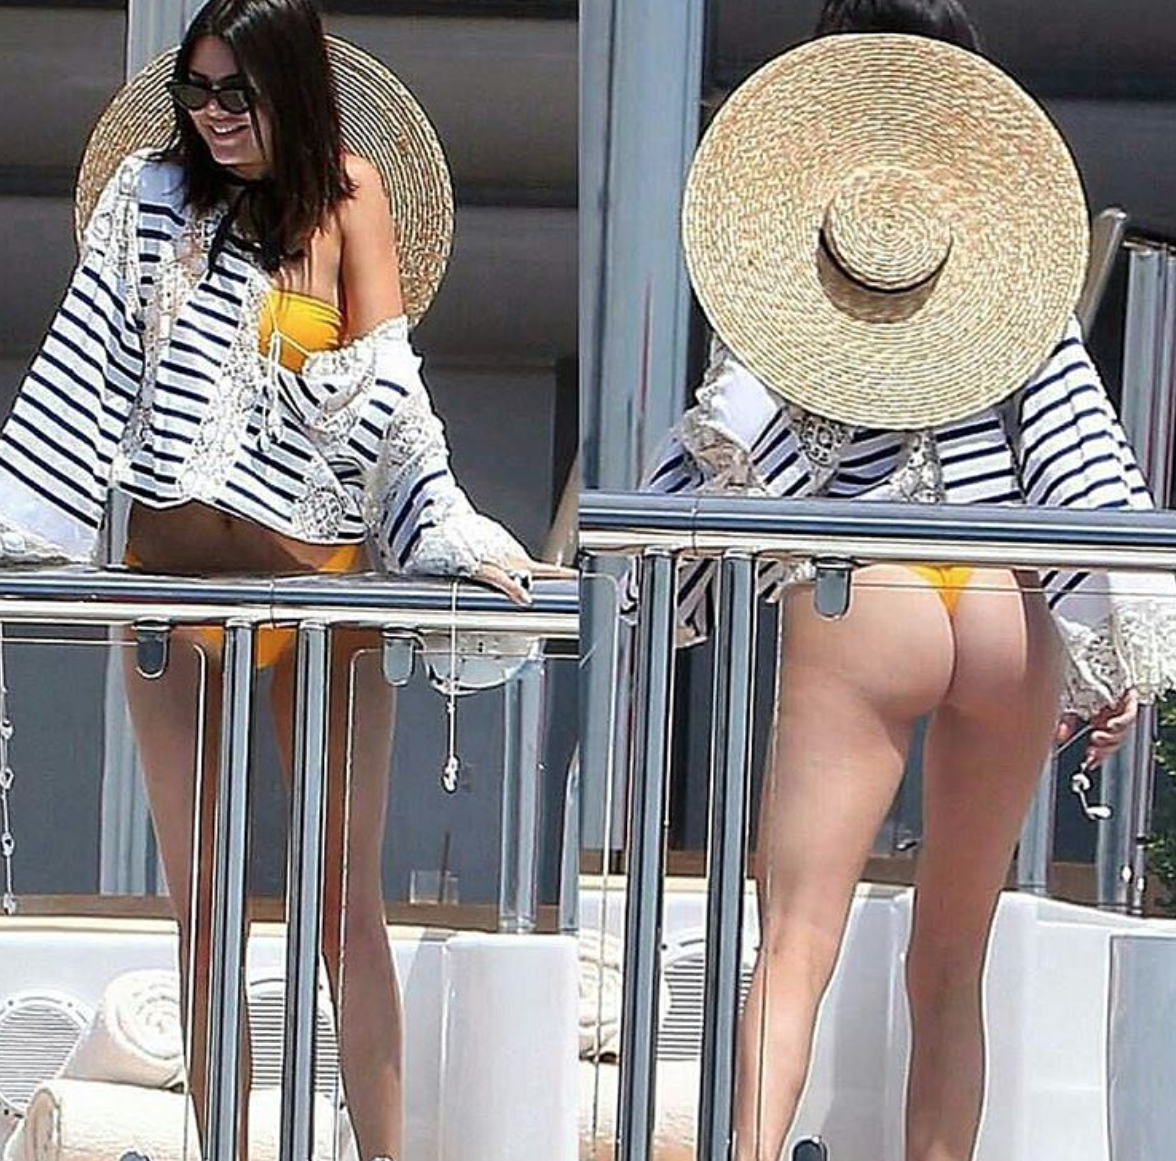 As you can see, Ms. Jenner got a little cheeky during her trip to Cannes. 